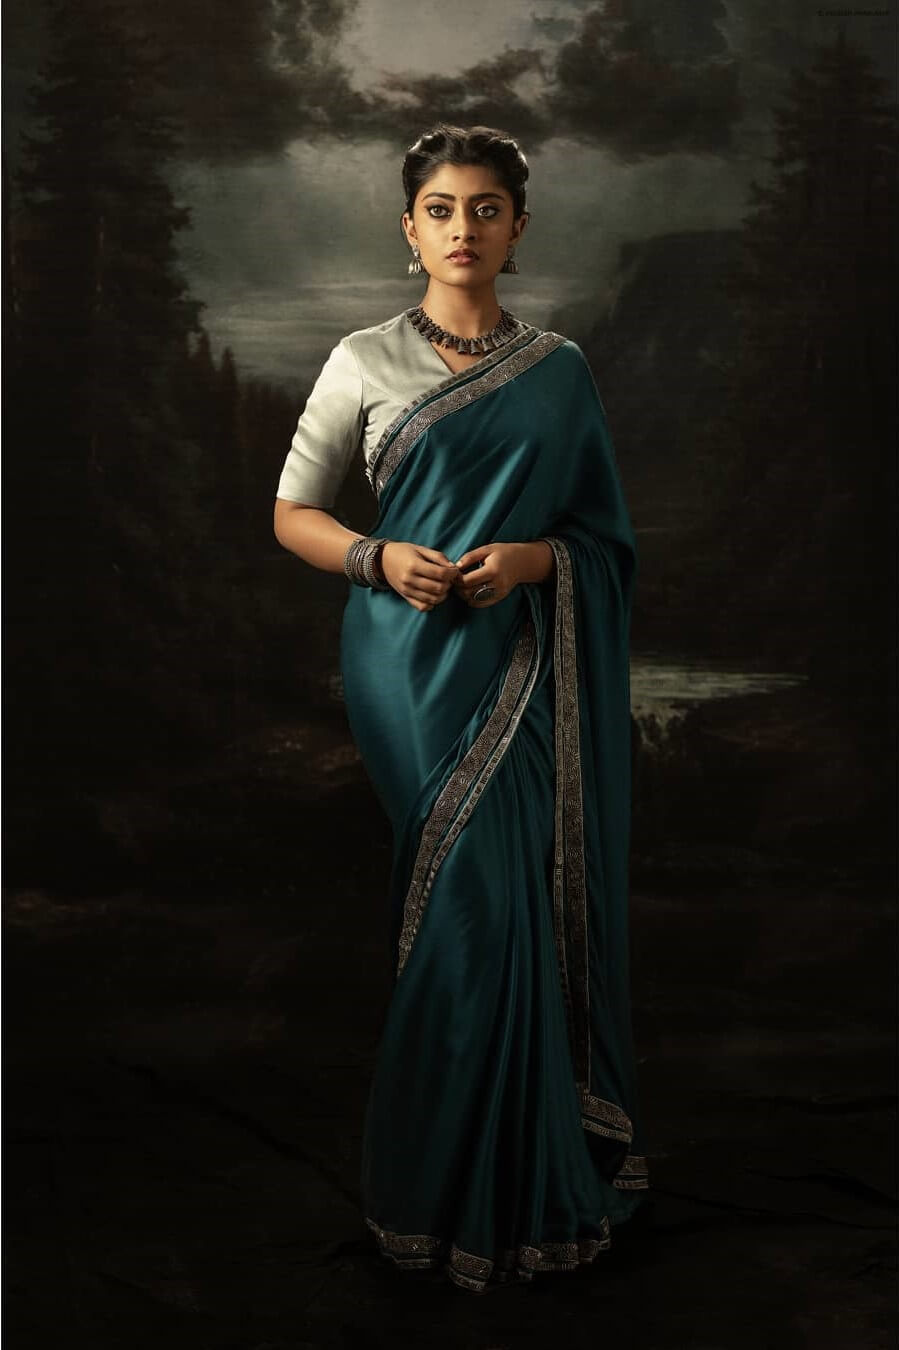 Gorgeous Ammu Abhirami Vintage Look In  Teel Blue Saree With Silver Blouse Radiant Looks & Outfits